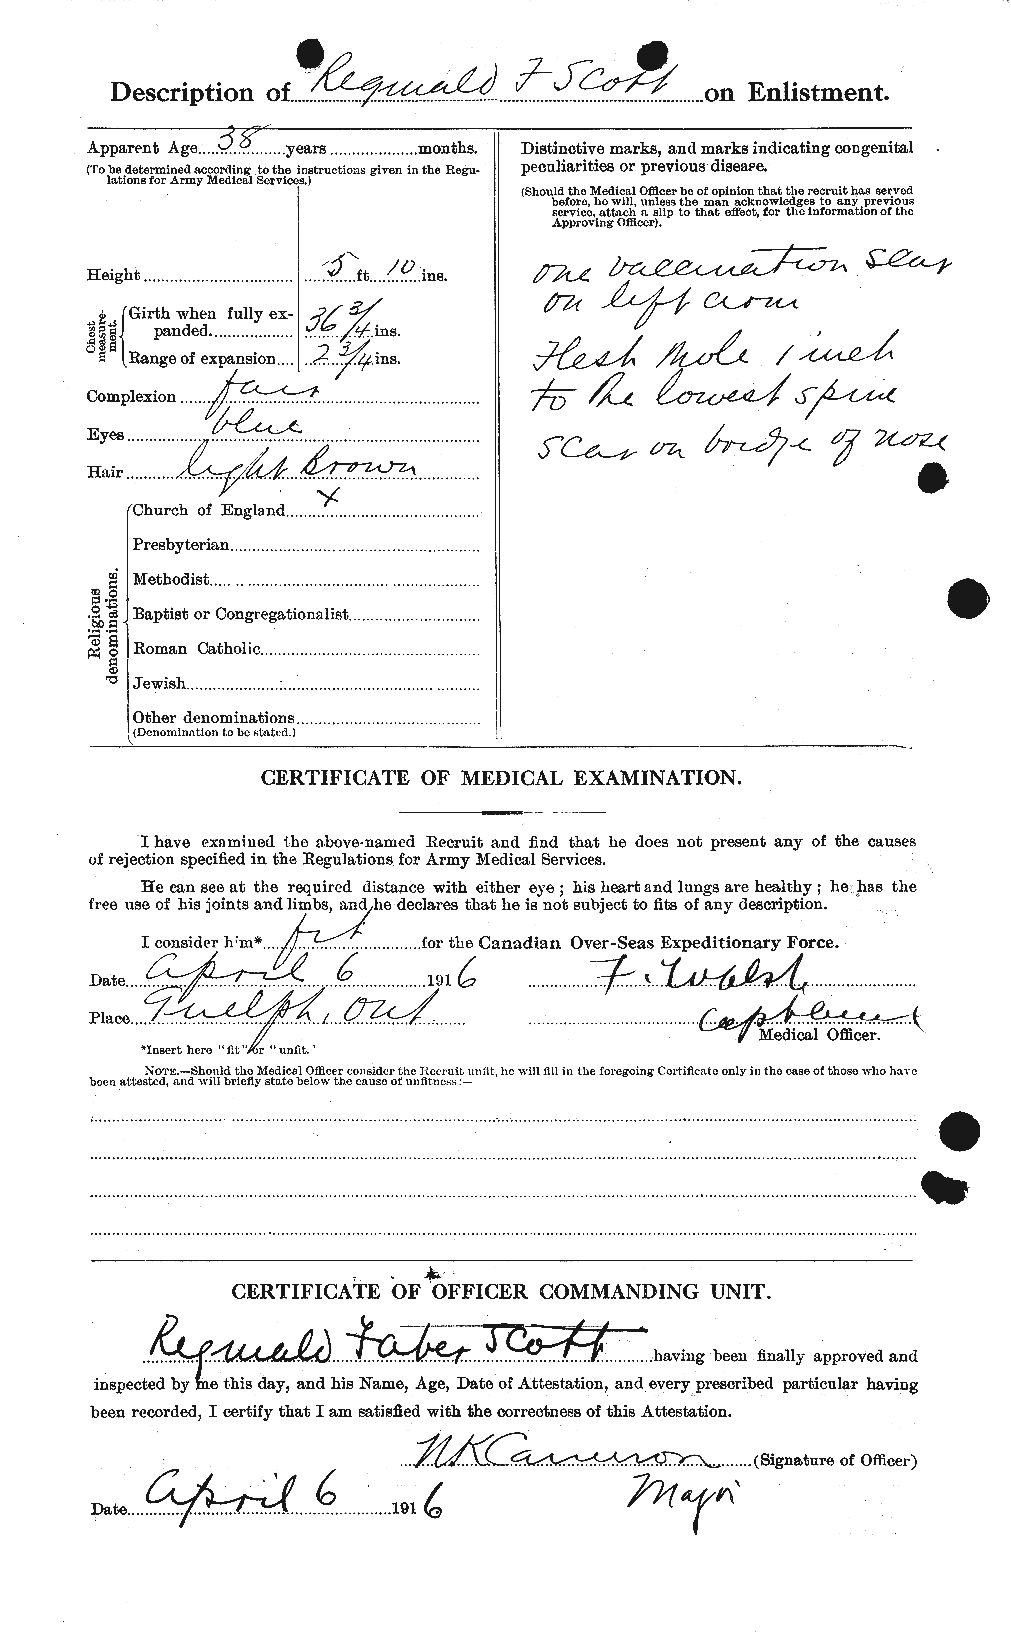 Personnel Records of the First World War - CEF 090197b